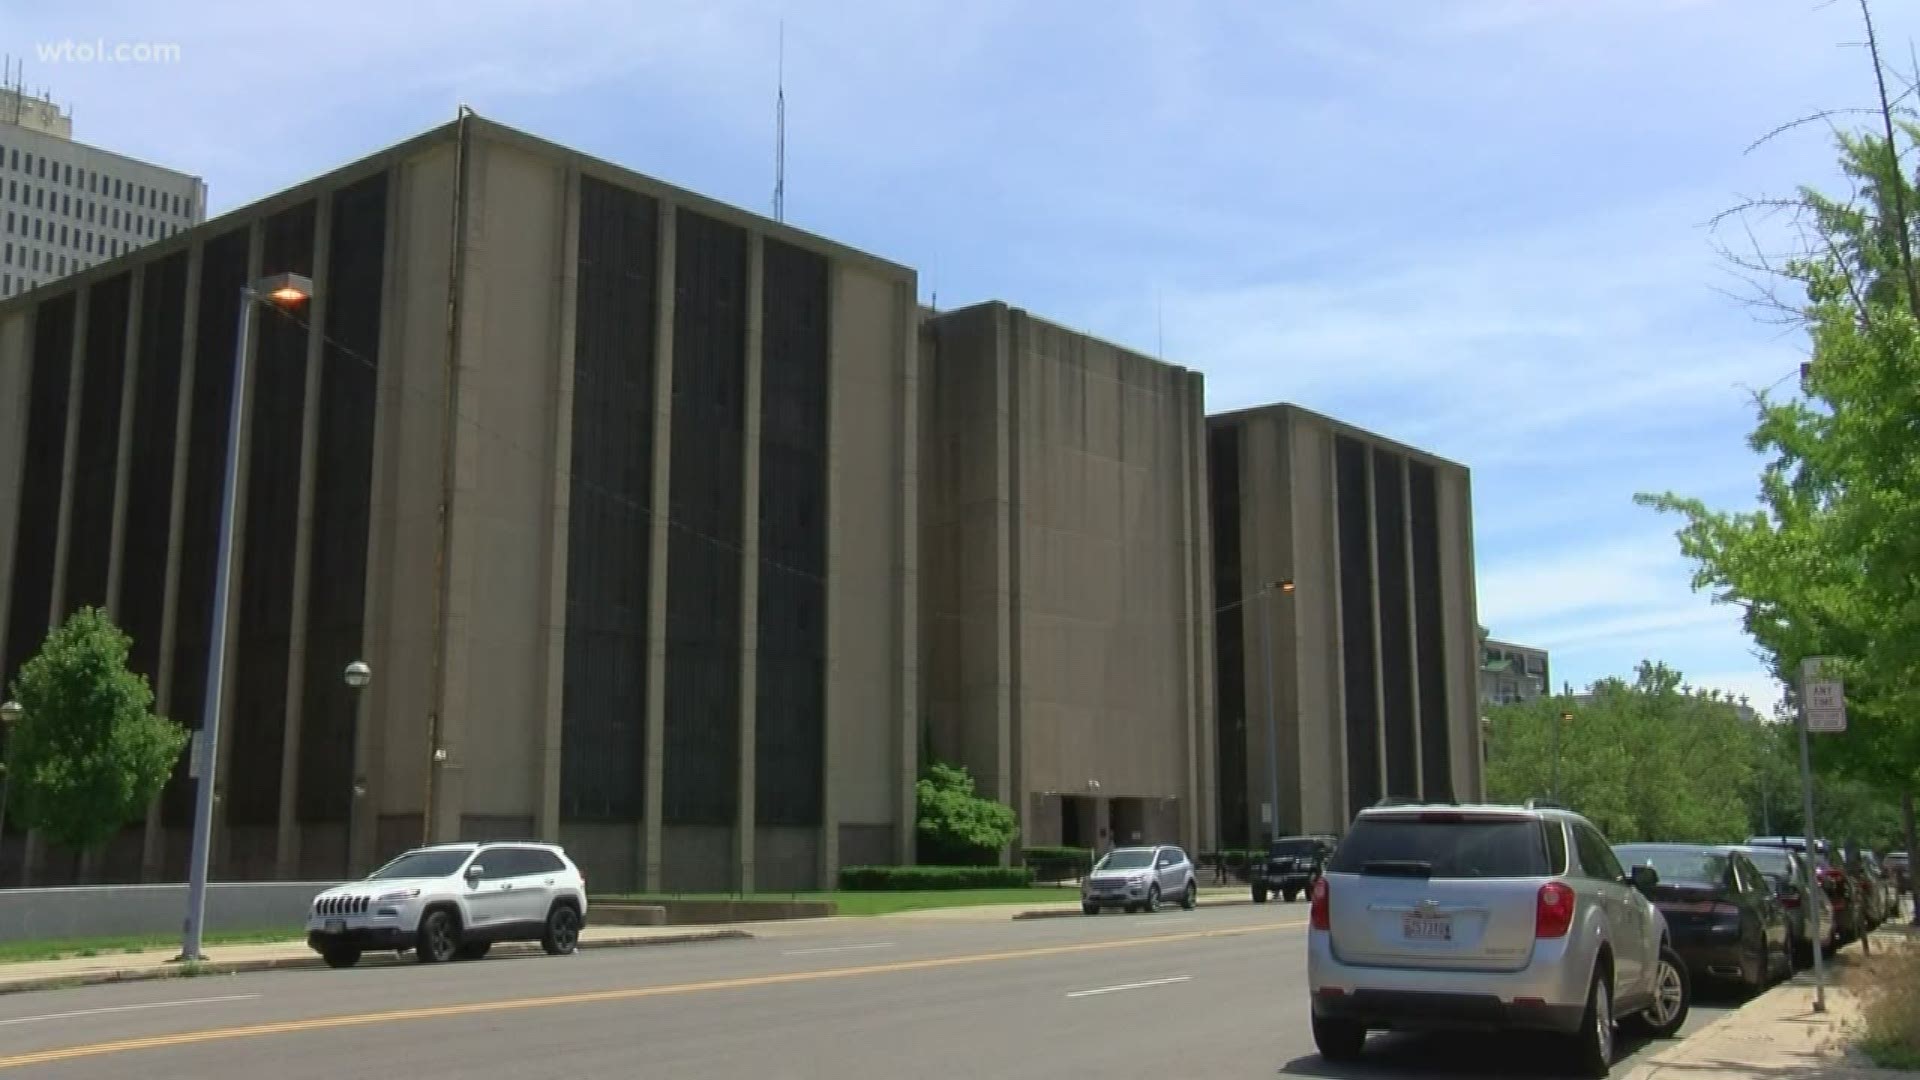 Although electricity is working at the jail, inmates eligible to post bail will have to wait until computers are working again.